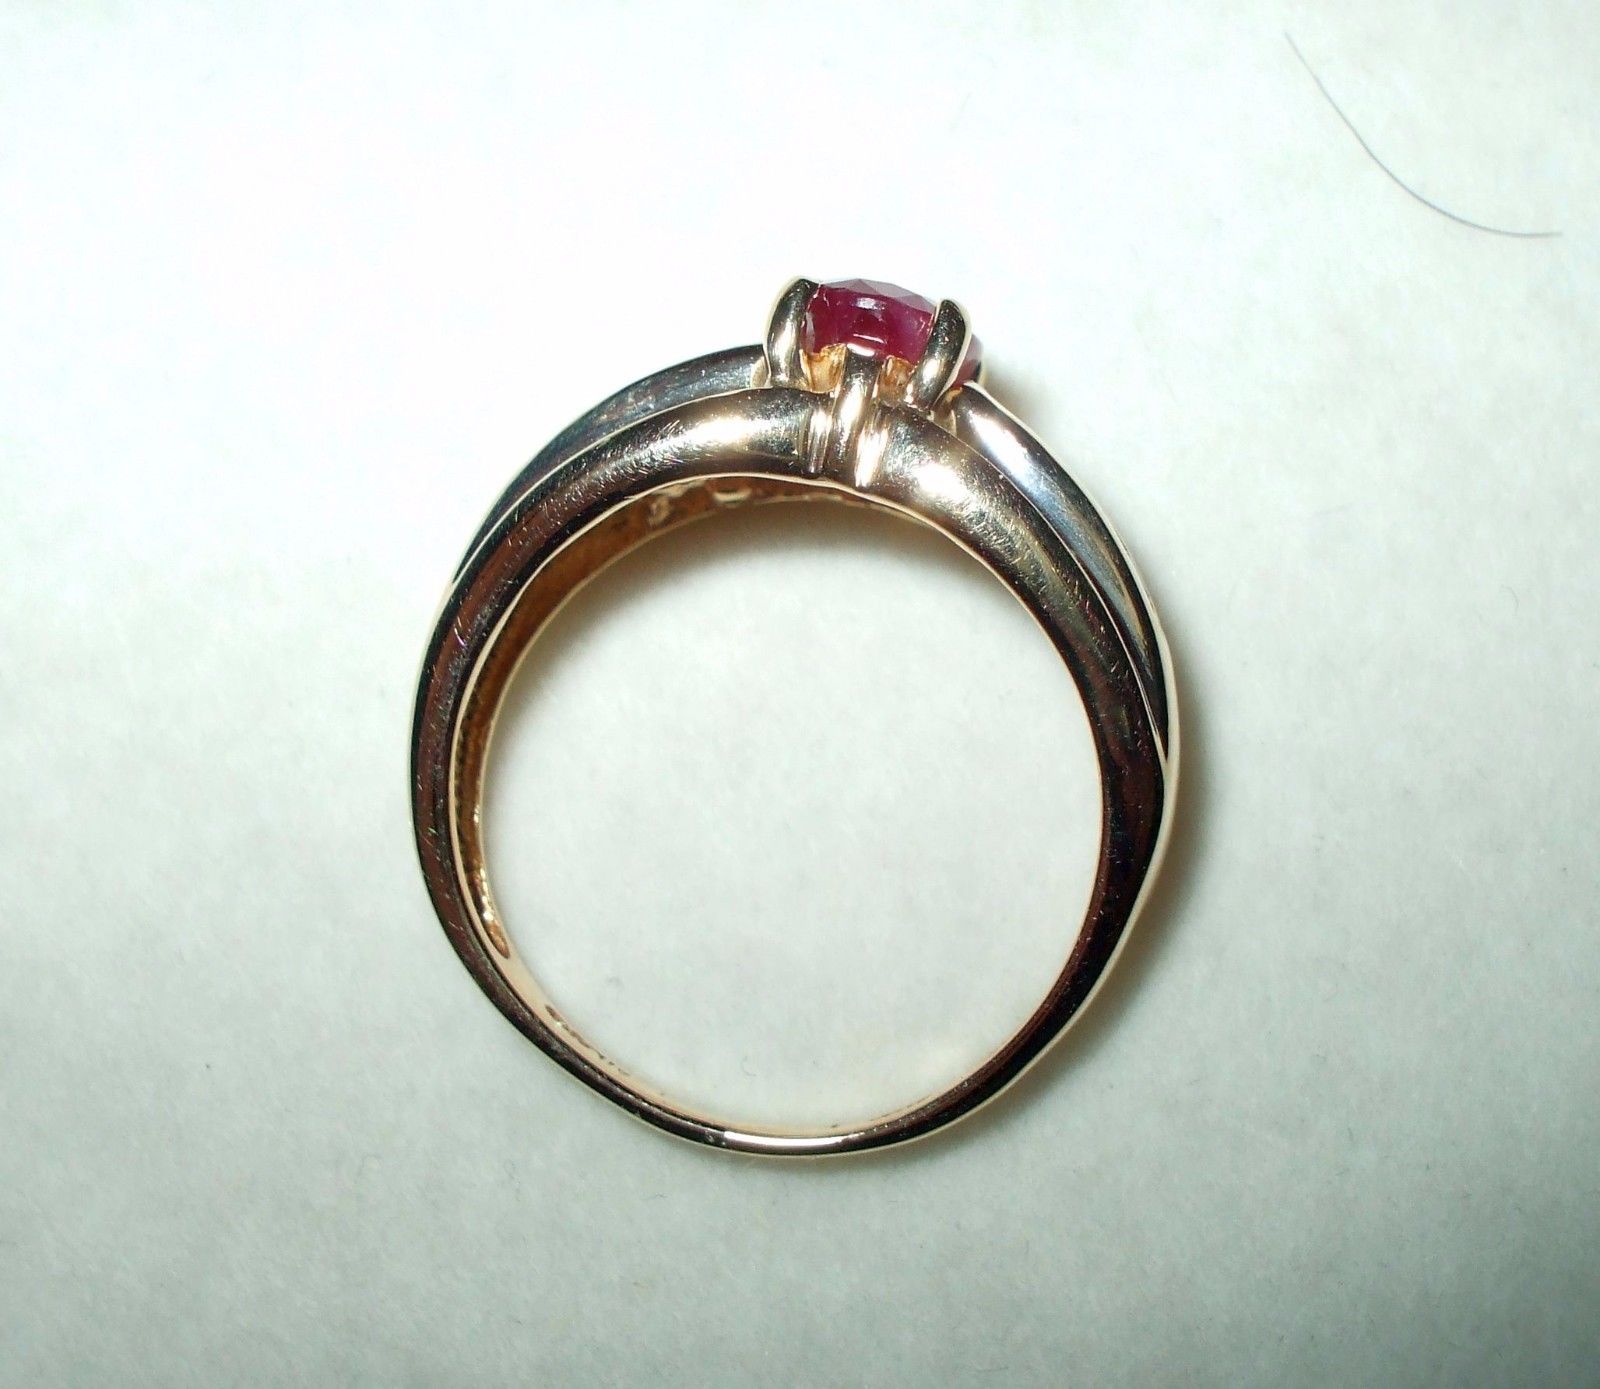 Genuine 1.0 ct Oval Ruby & Diamond Ring 14K yellow gold $2500 NWT